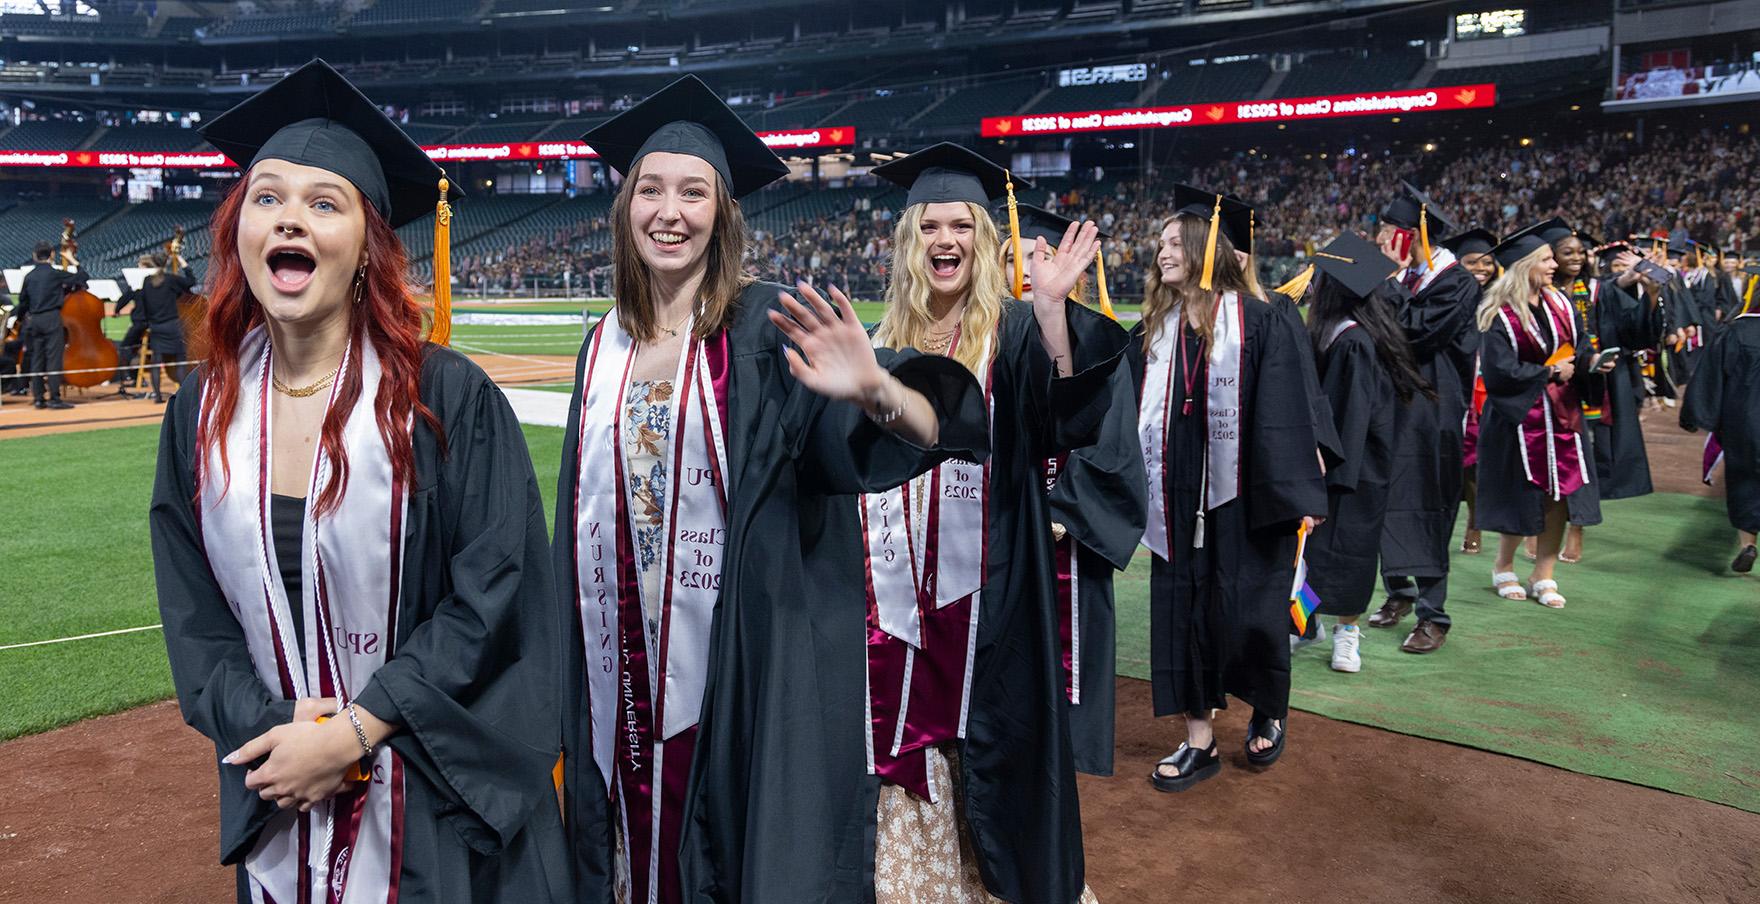 SPU grads line up at T-mobile Park | photo by Mike Siegel